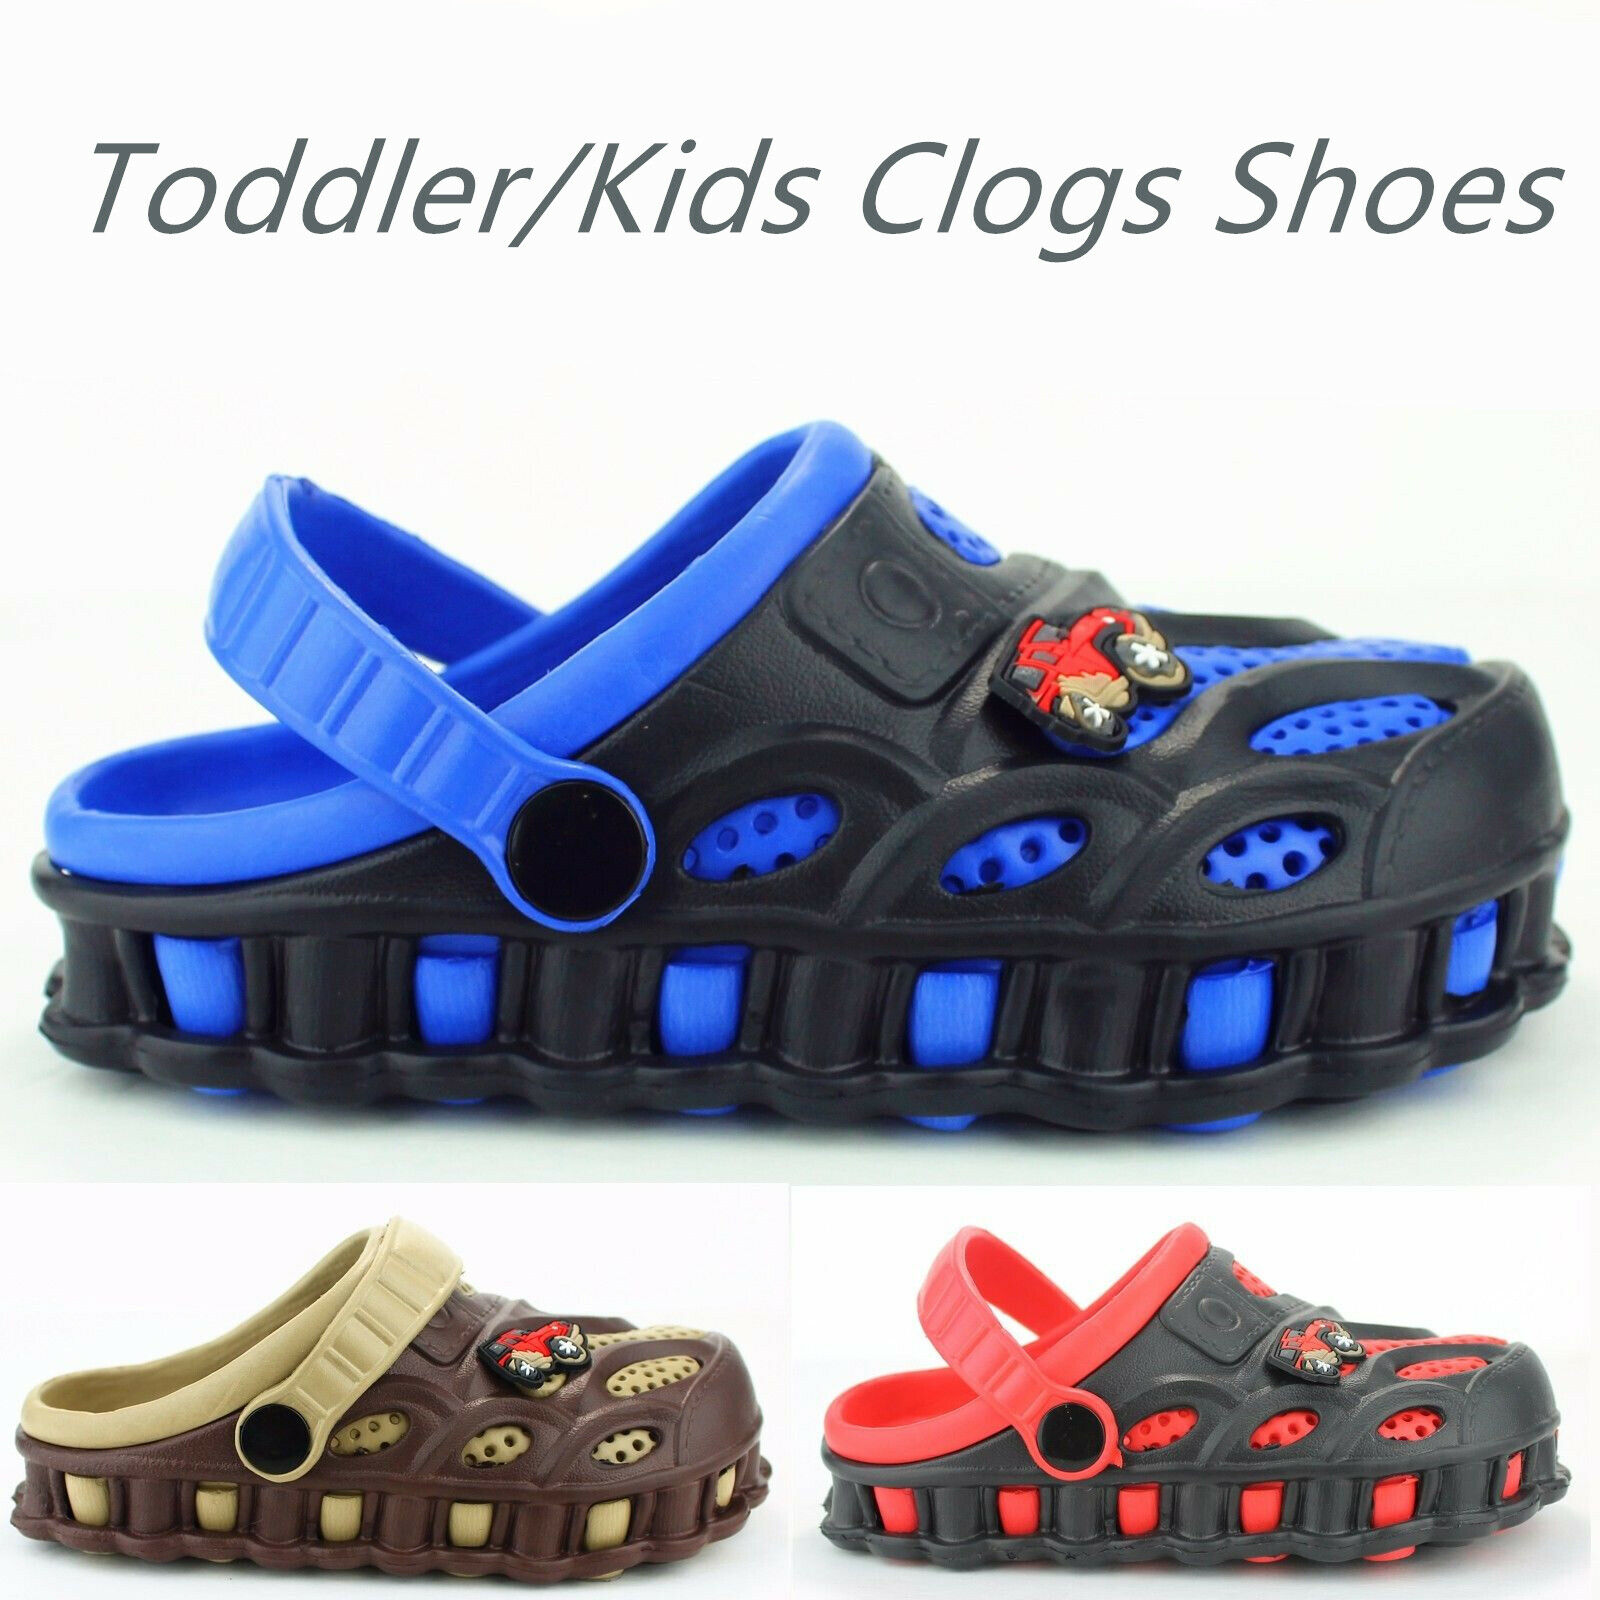 Boys Kids Garden Clogs Shoes Toddler Slip-on Casual Two-tone Slipper Sandals